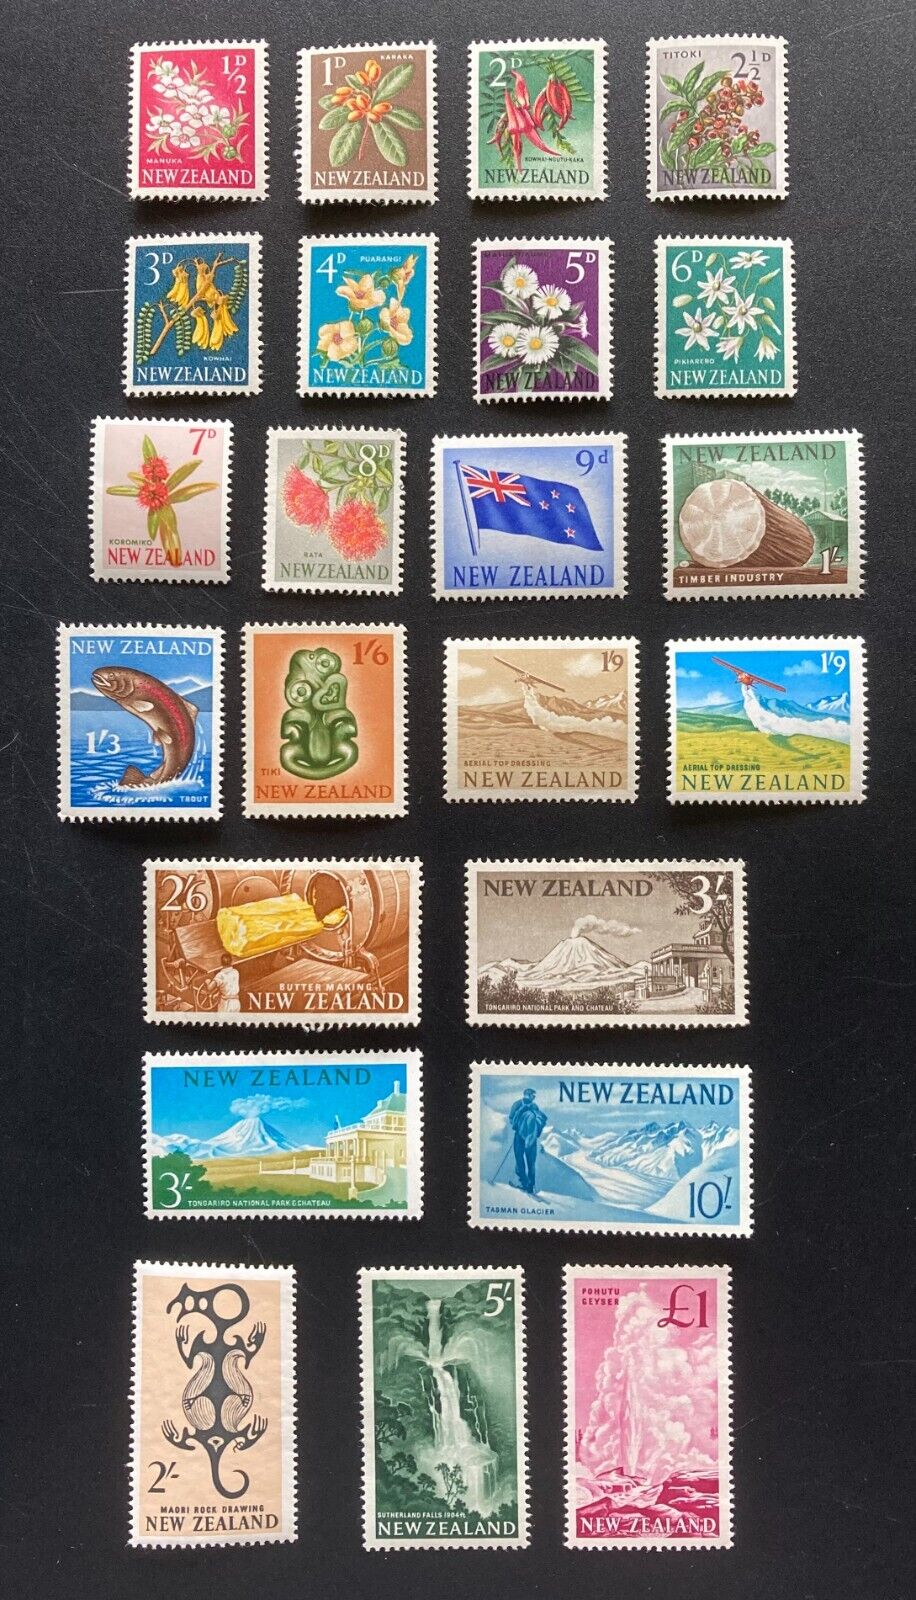 New Zealand Stamp 1960 Pictorials Complete Set - Mint Hinged